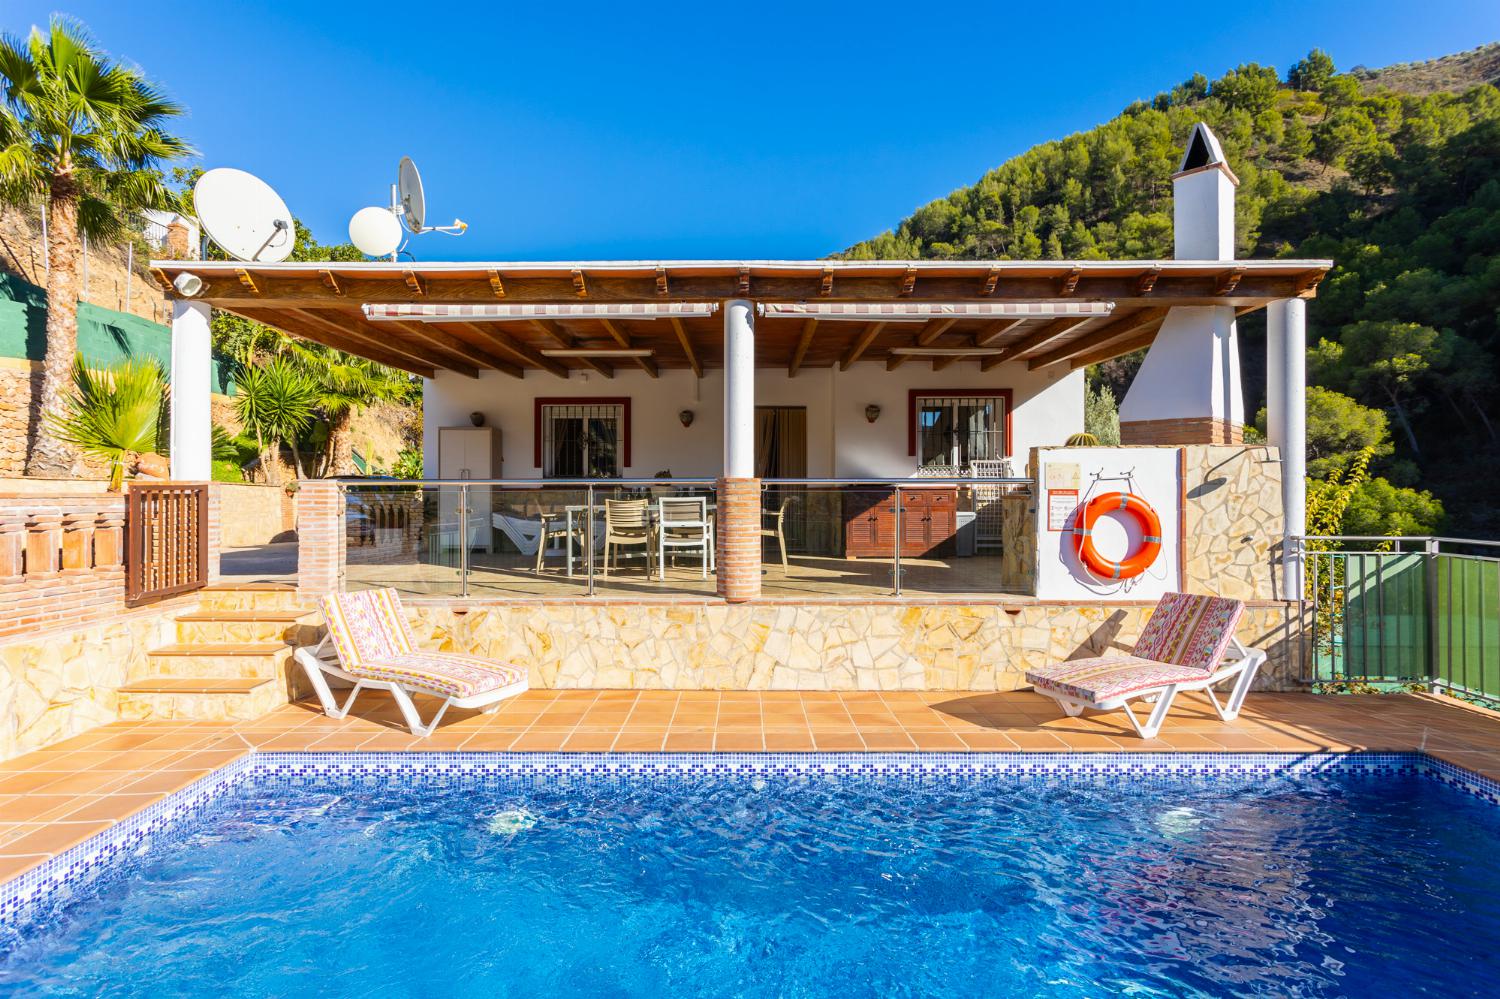 Beautiful villa with private pool and terrace with views